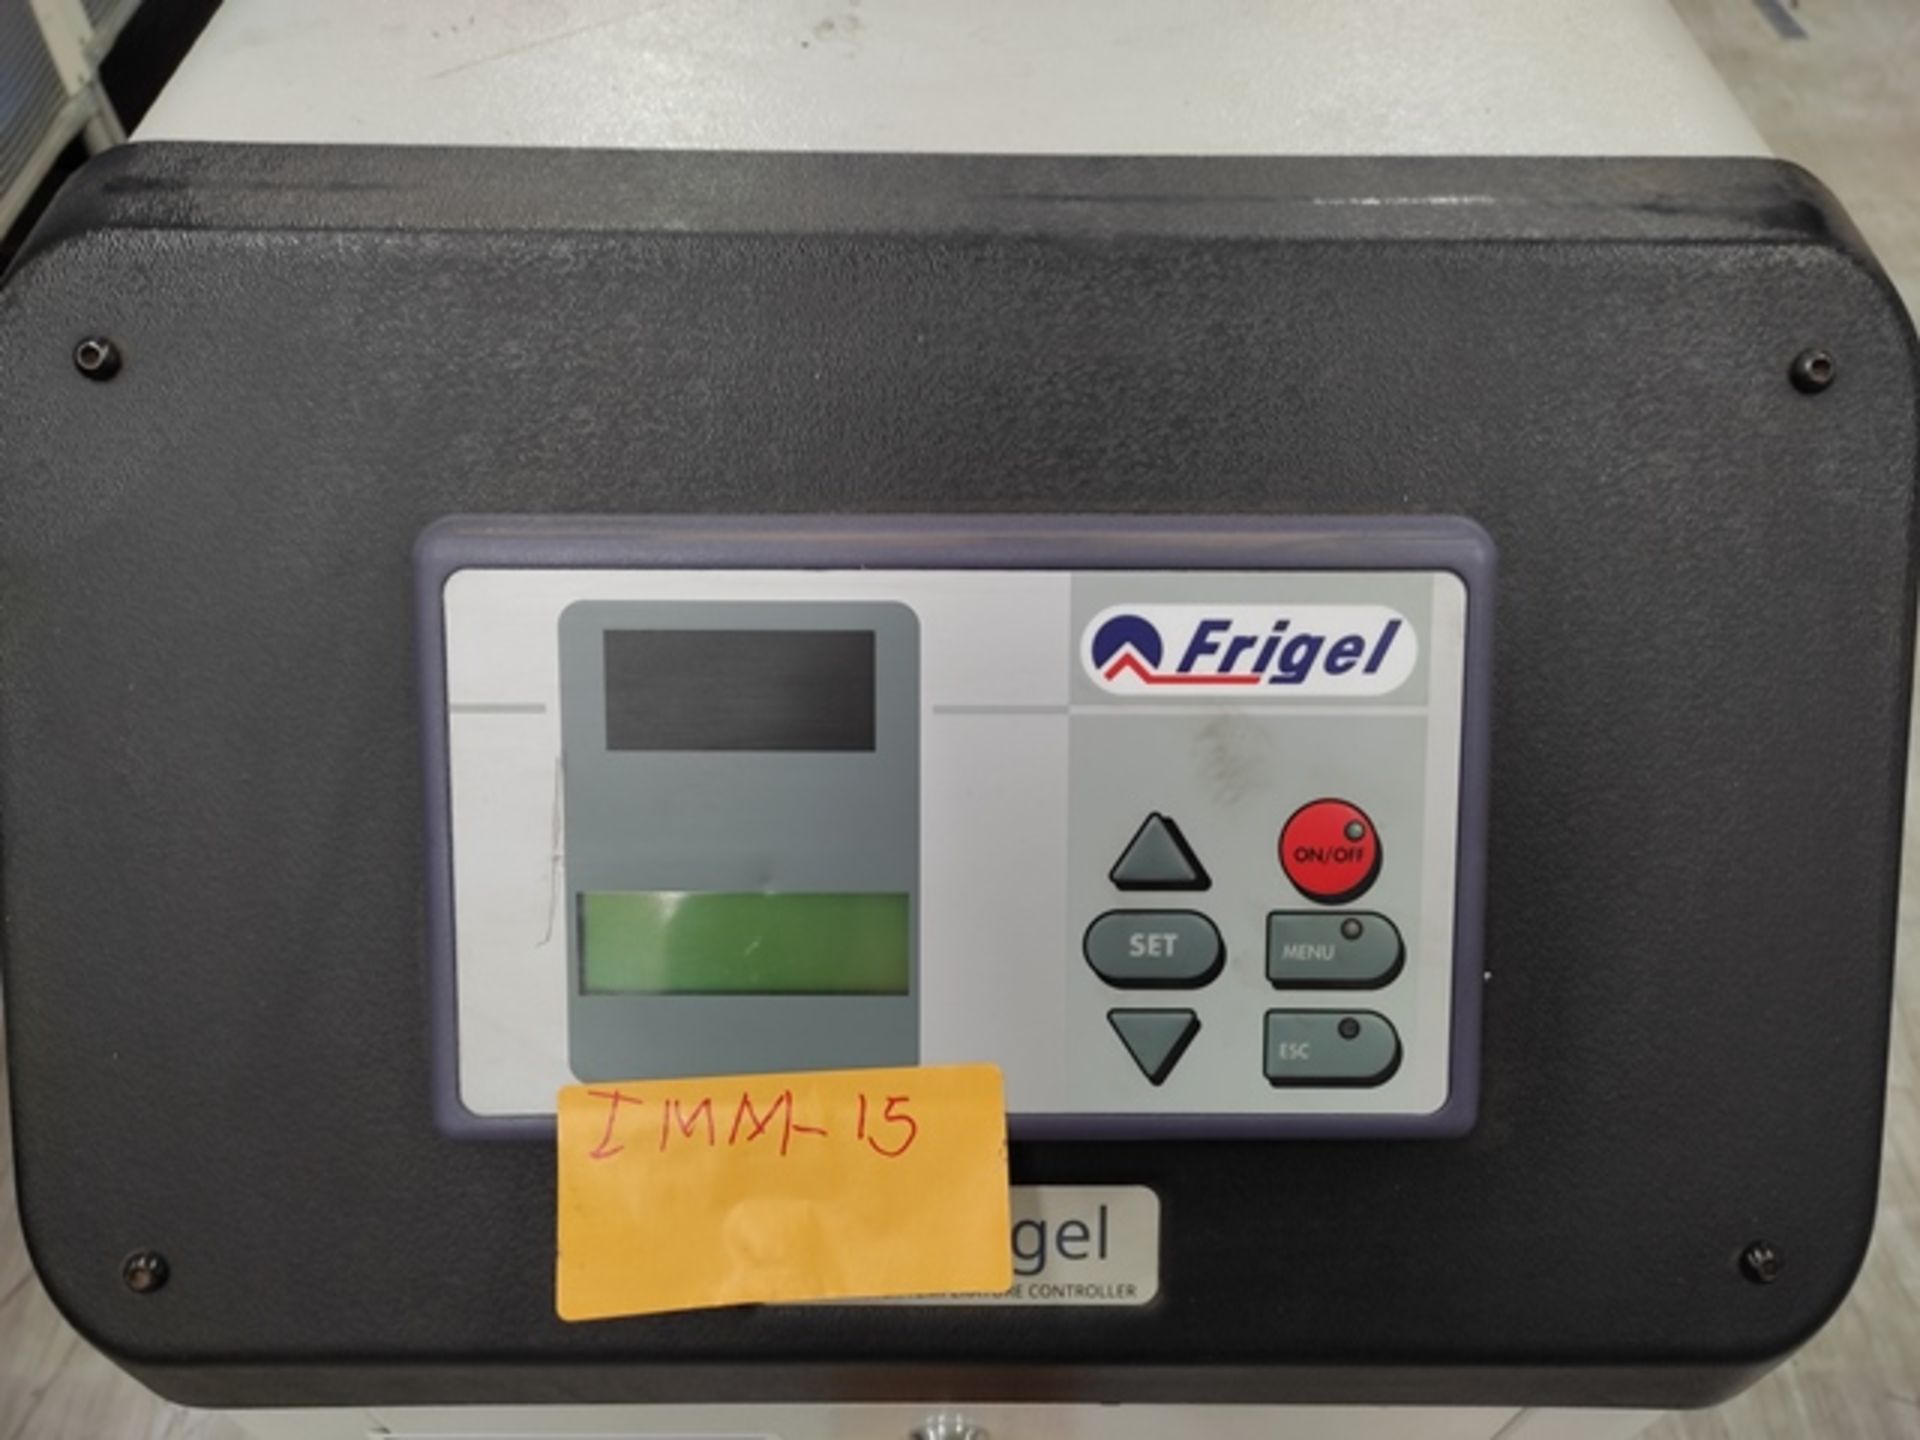 Lot of: (3) Frigel RBD130/24 SP 24 KW Flow Booster Temperature Controller, Year: 2017; - Image 11 of 16